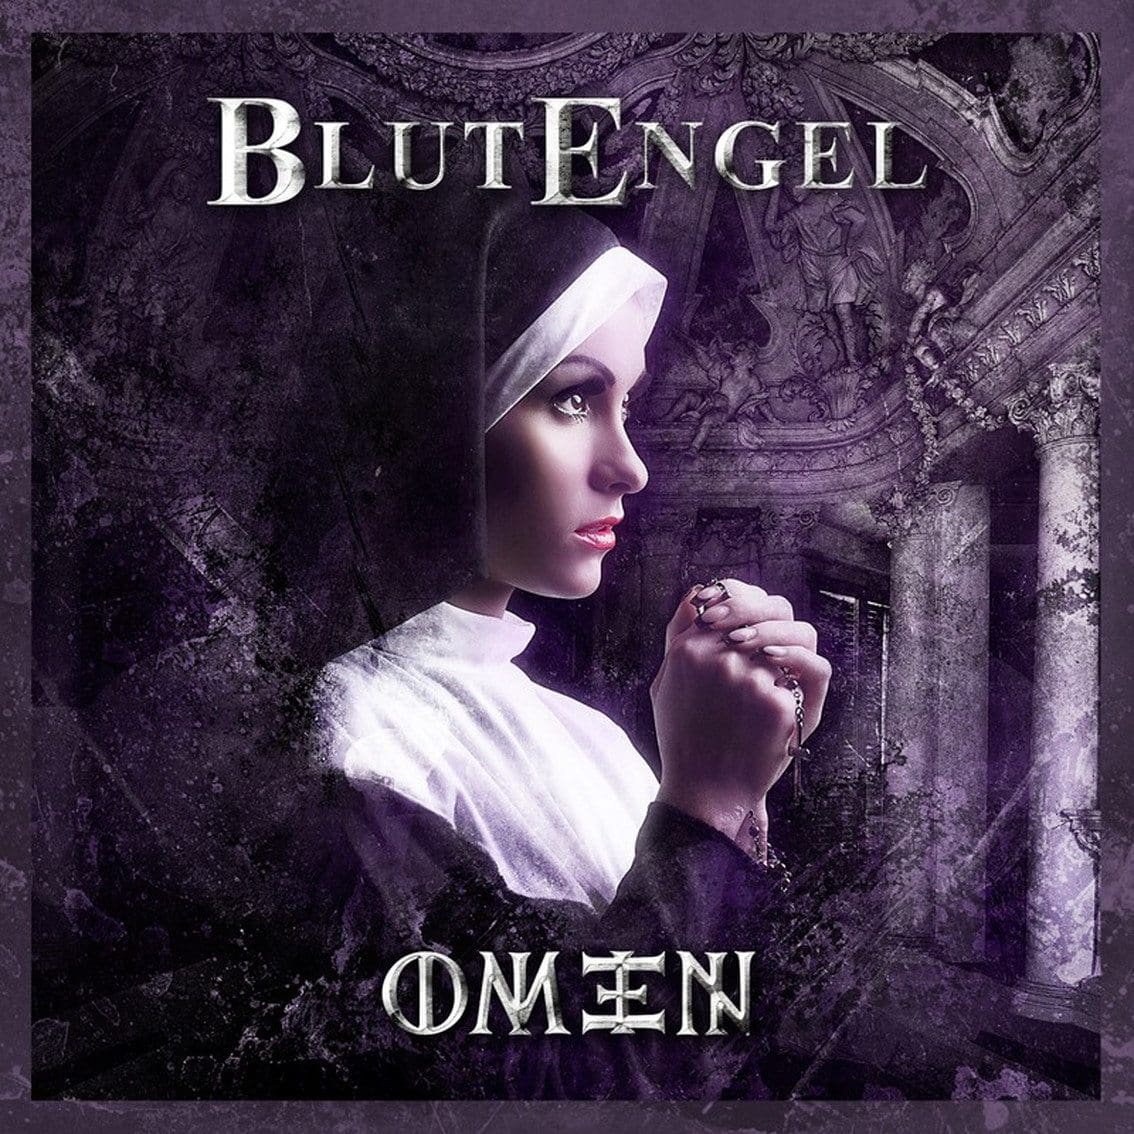 Blutengel forced to rename'Open' album to'Save Us' due to legal dispute